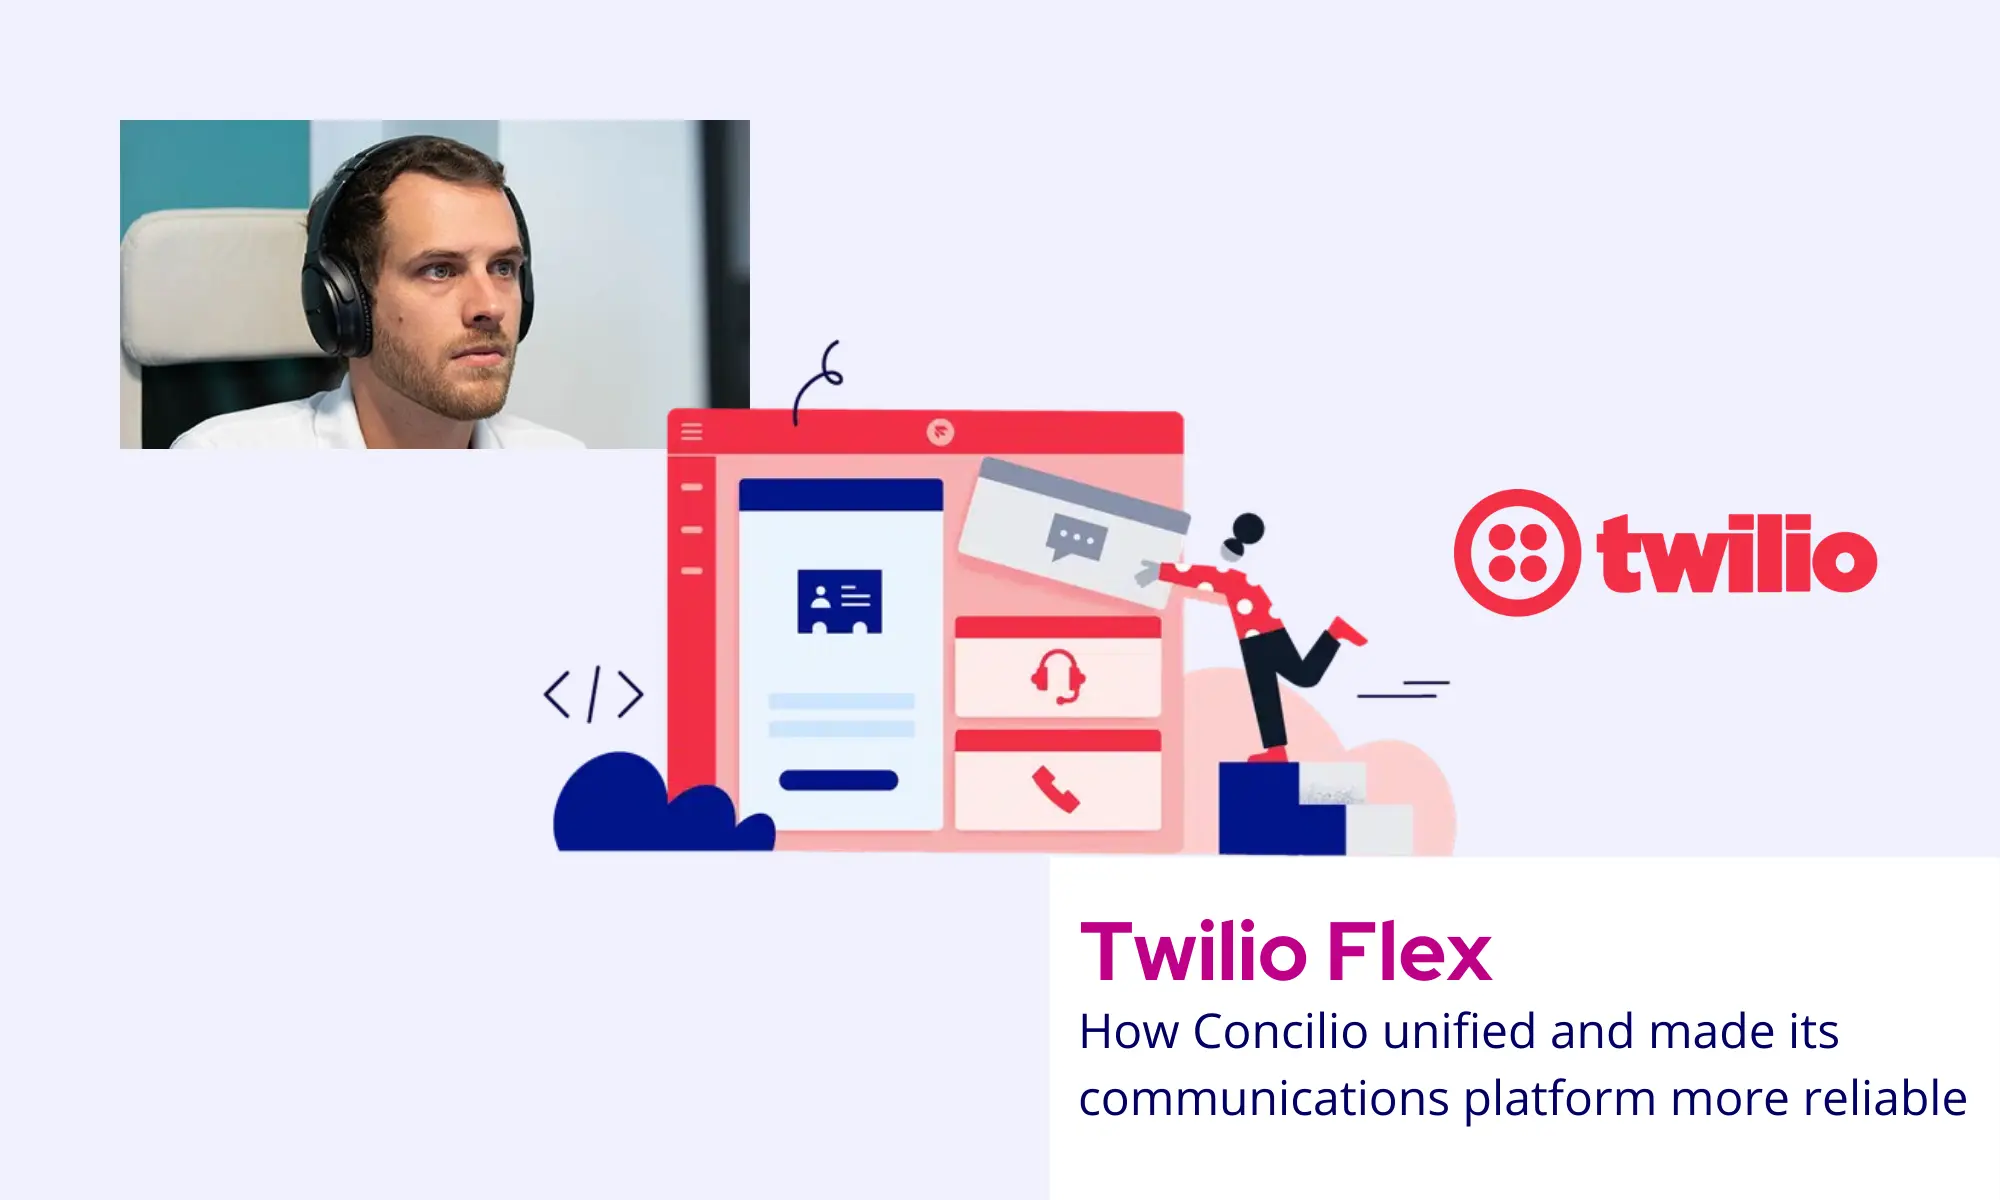 How Concilio unified and made its communications platform more reliable